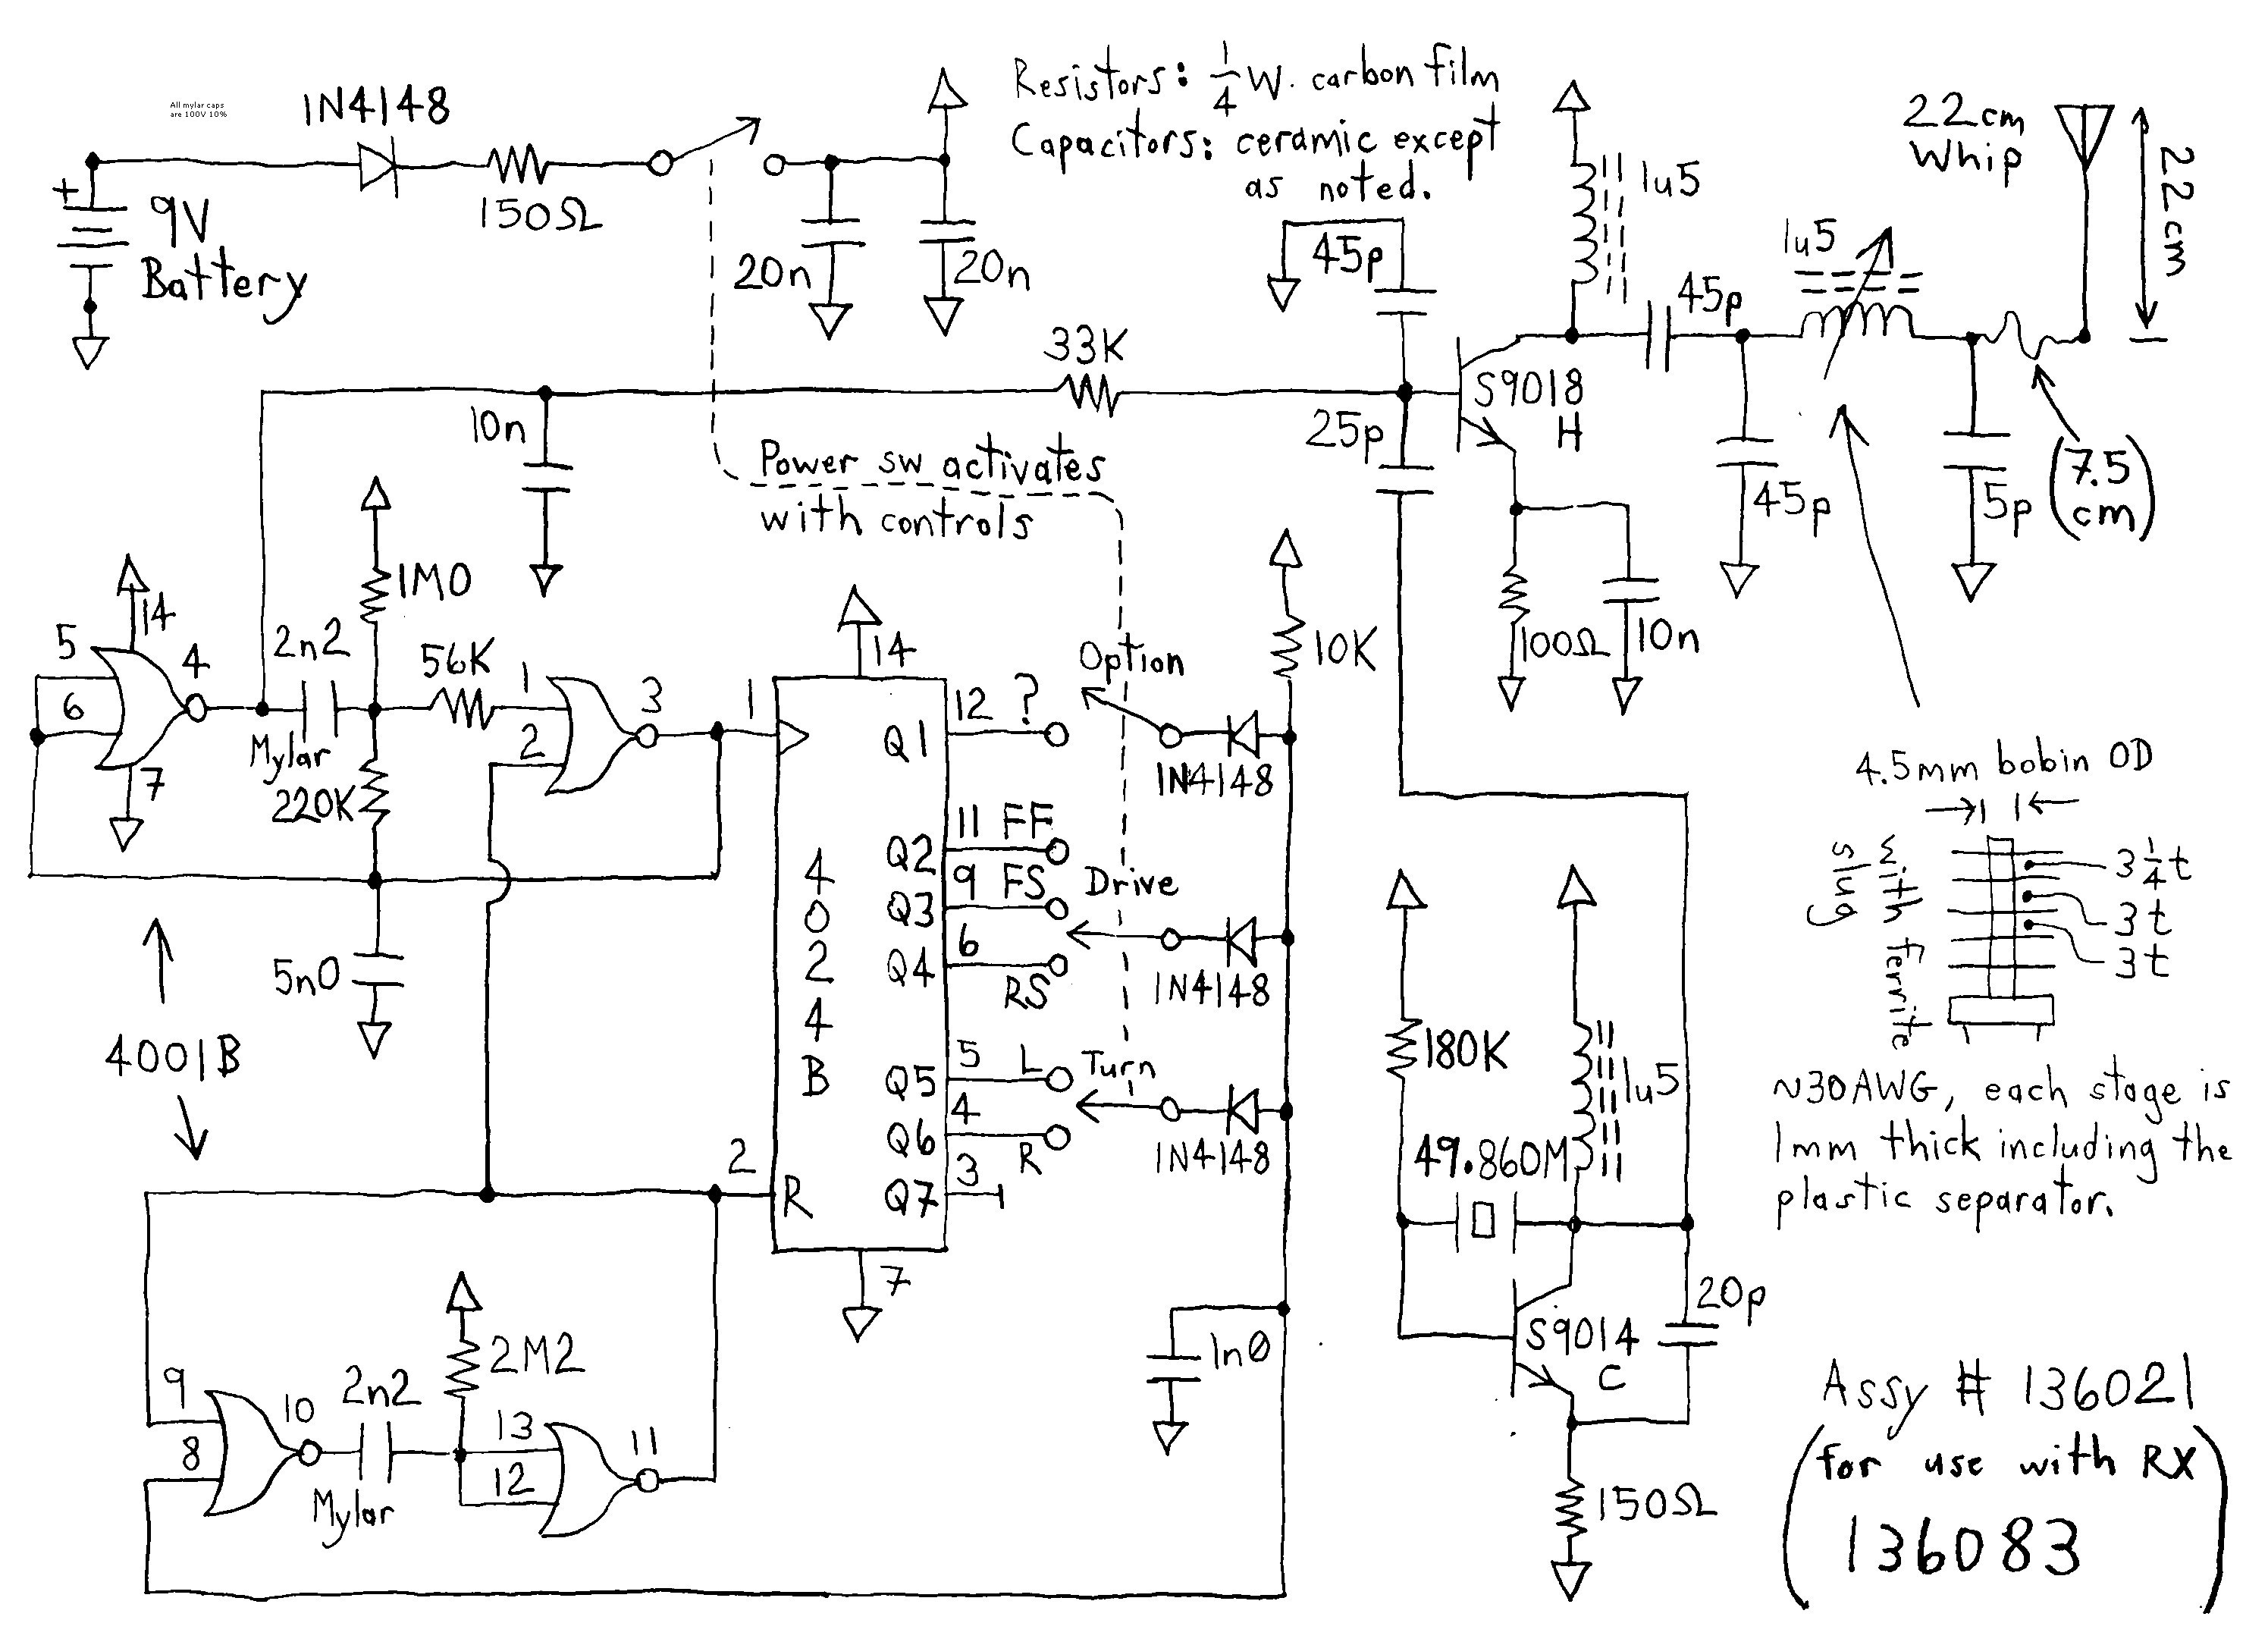 Bulldog Car Wiring Diagrams Automotive Wiring Diagram Download Refrence Electrical Circuit Of Bulldog Car Wiring Diagrams